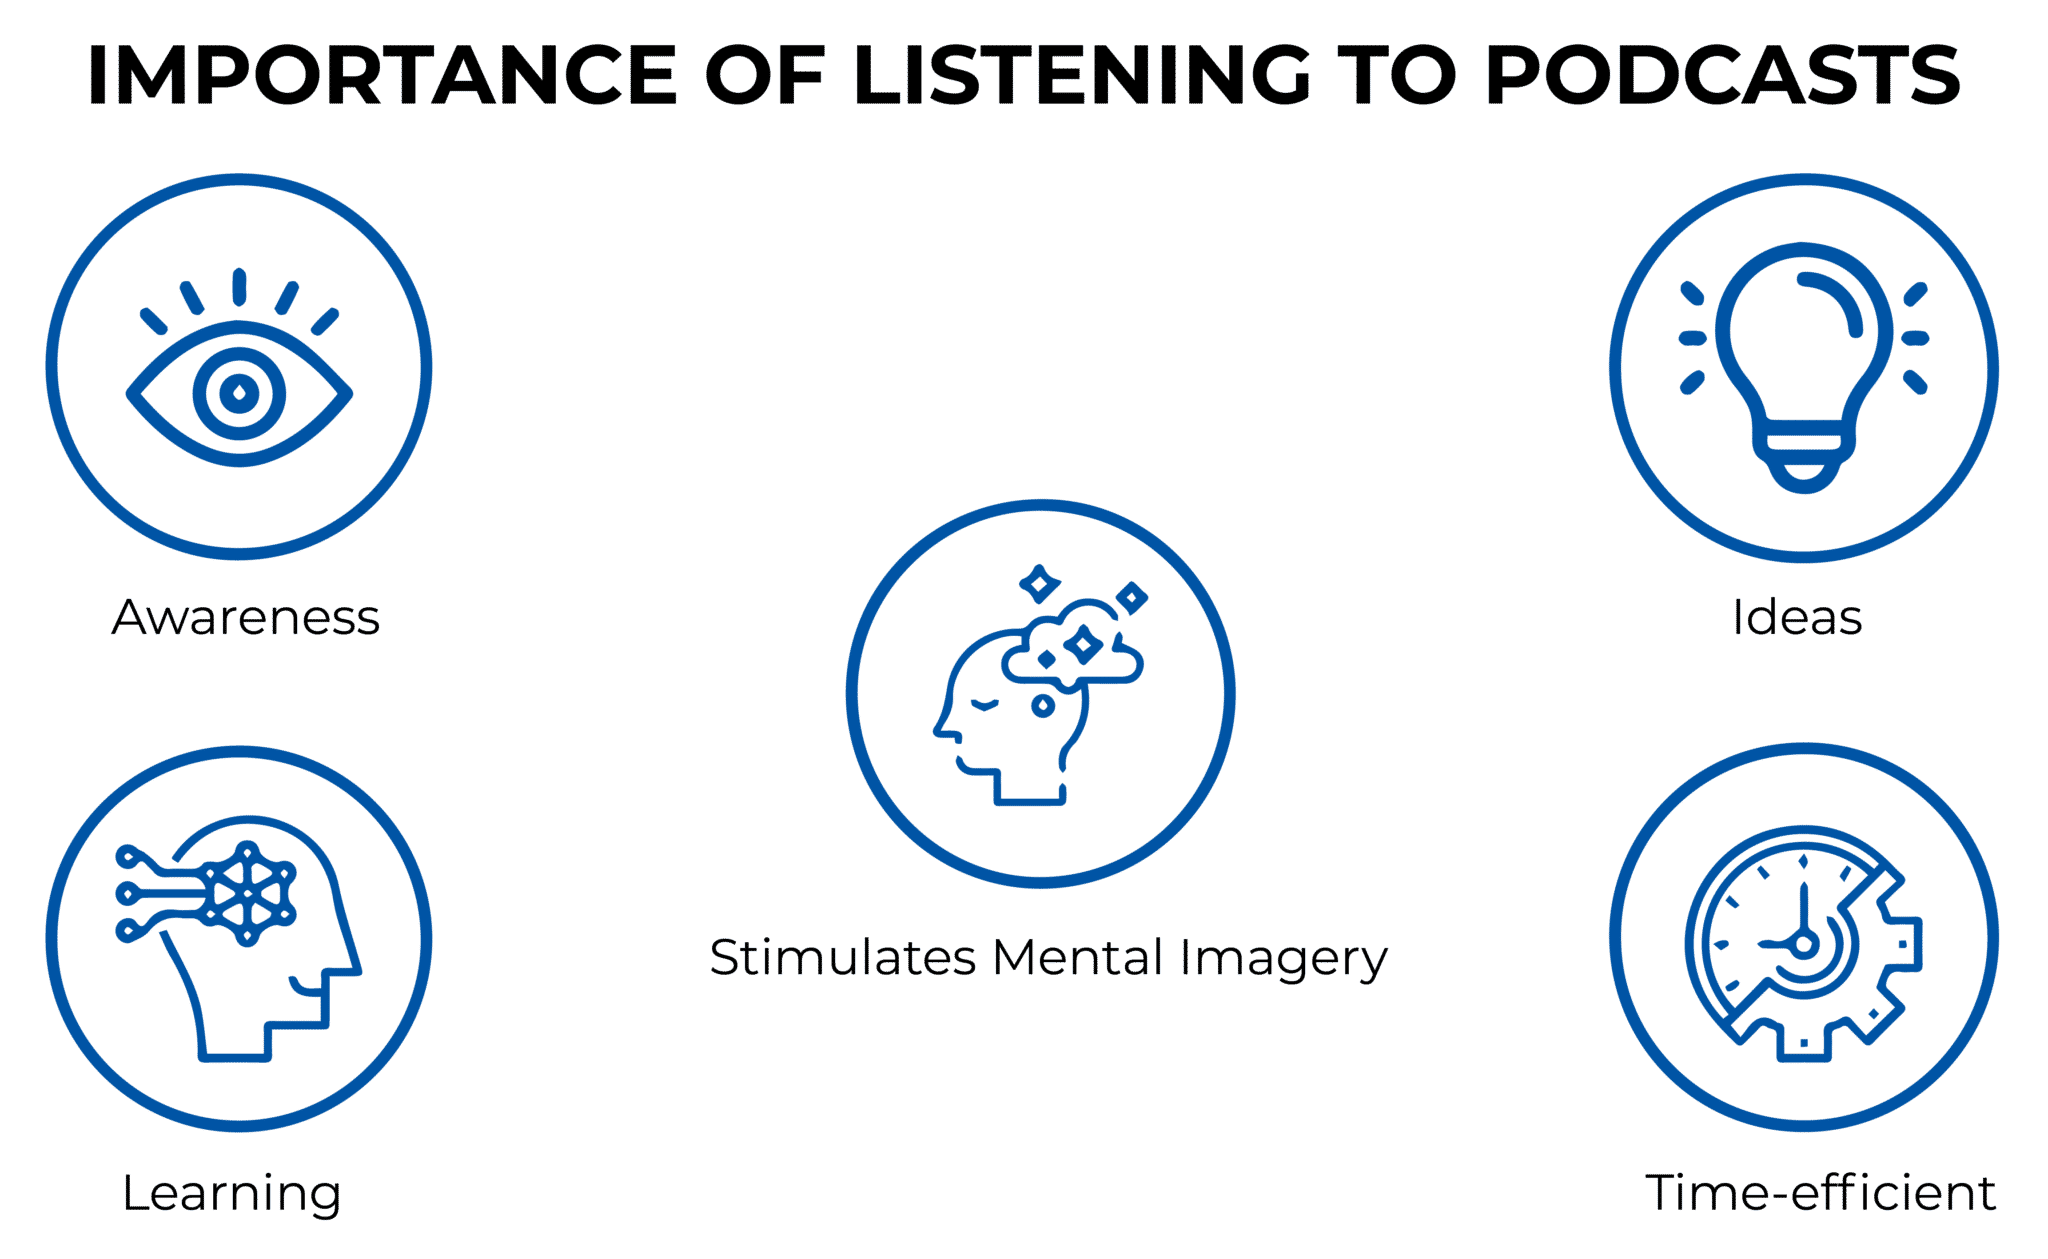 IMPORTANCE OF LISTENING TO PODCASTS